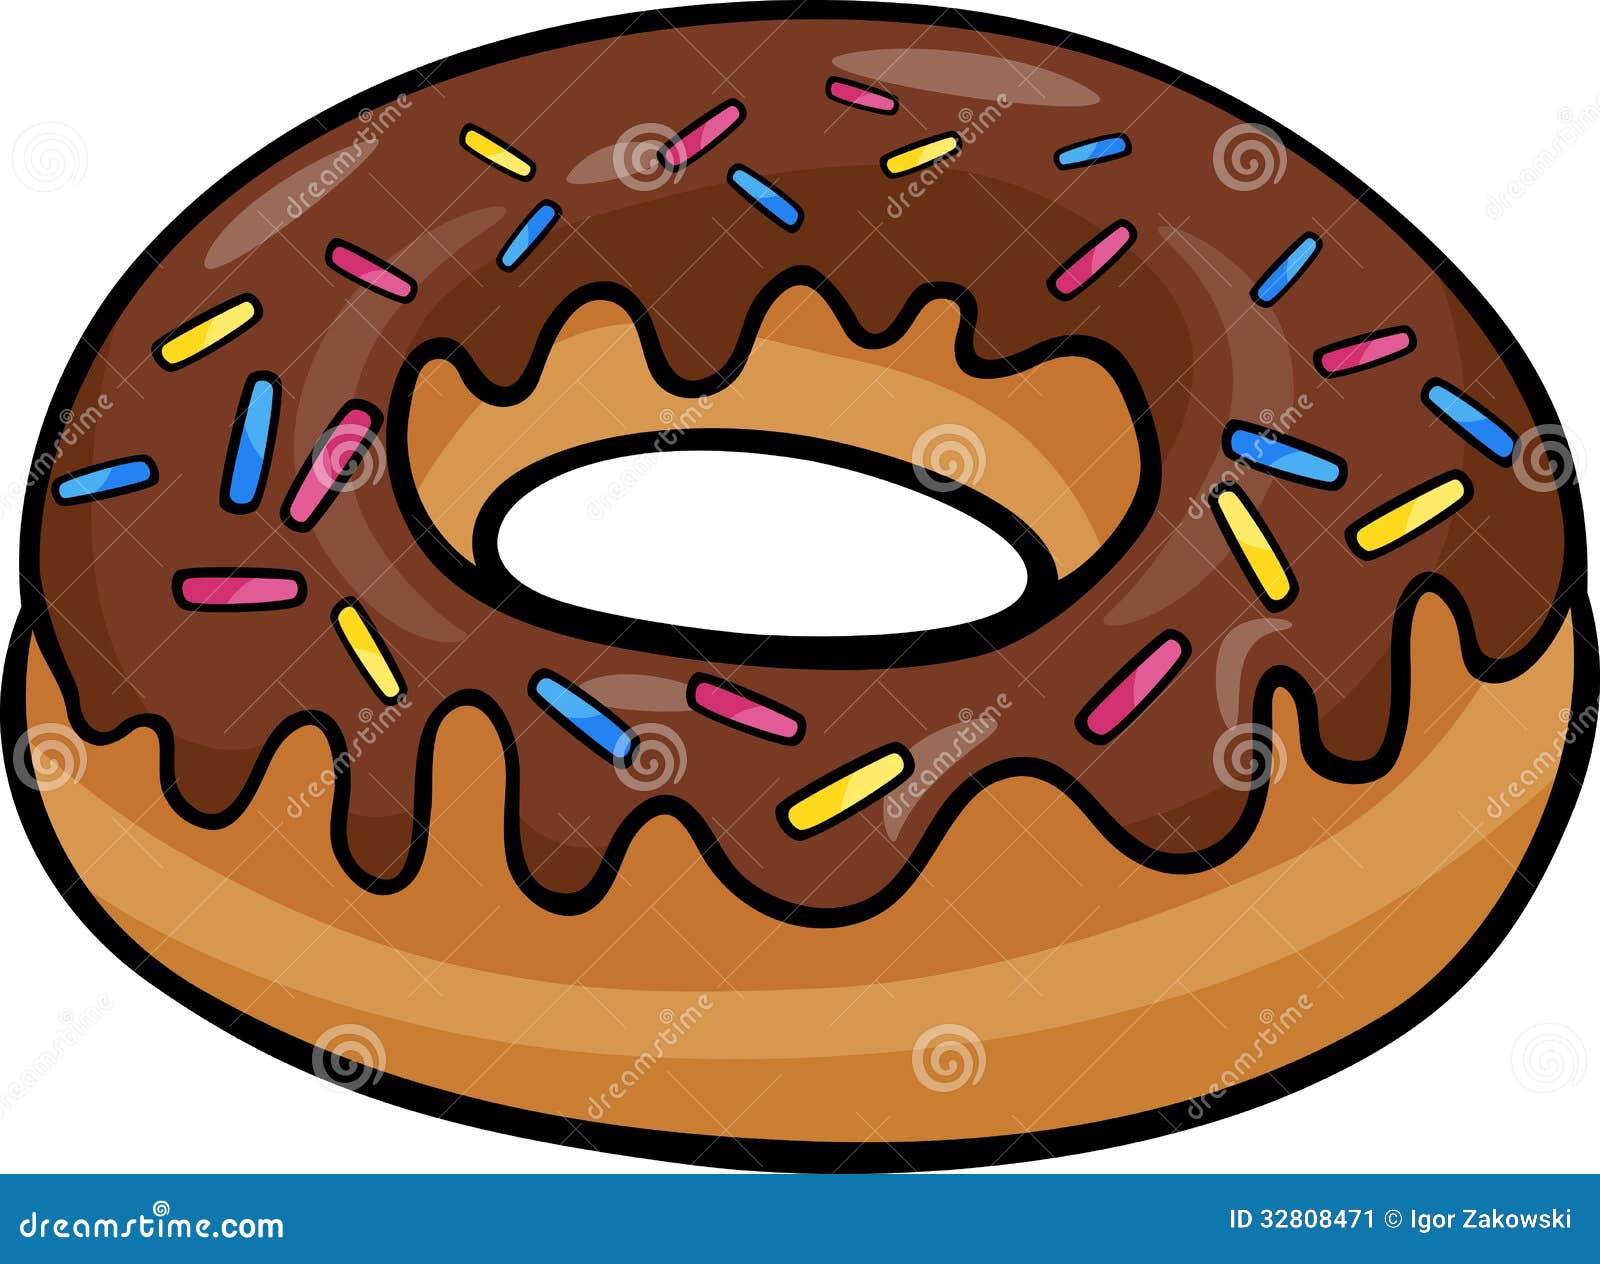 clipart images donuts - photo #37